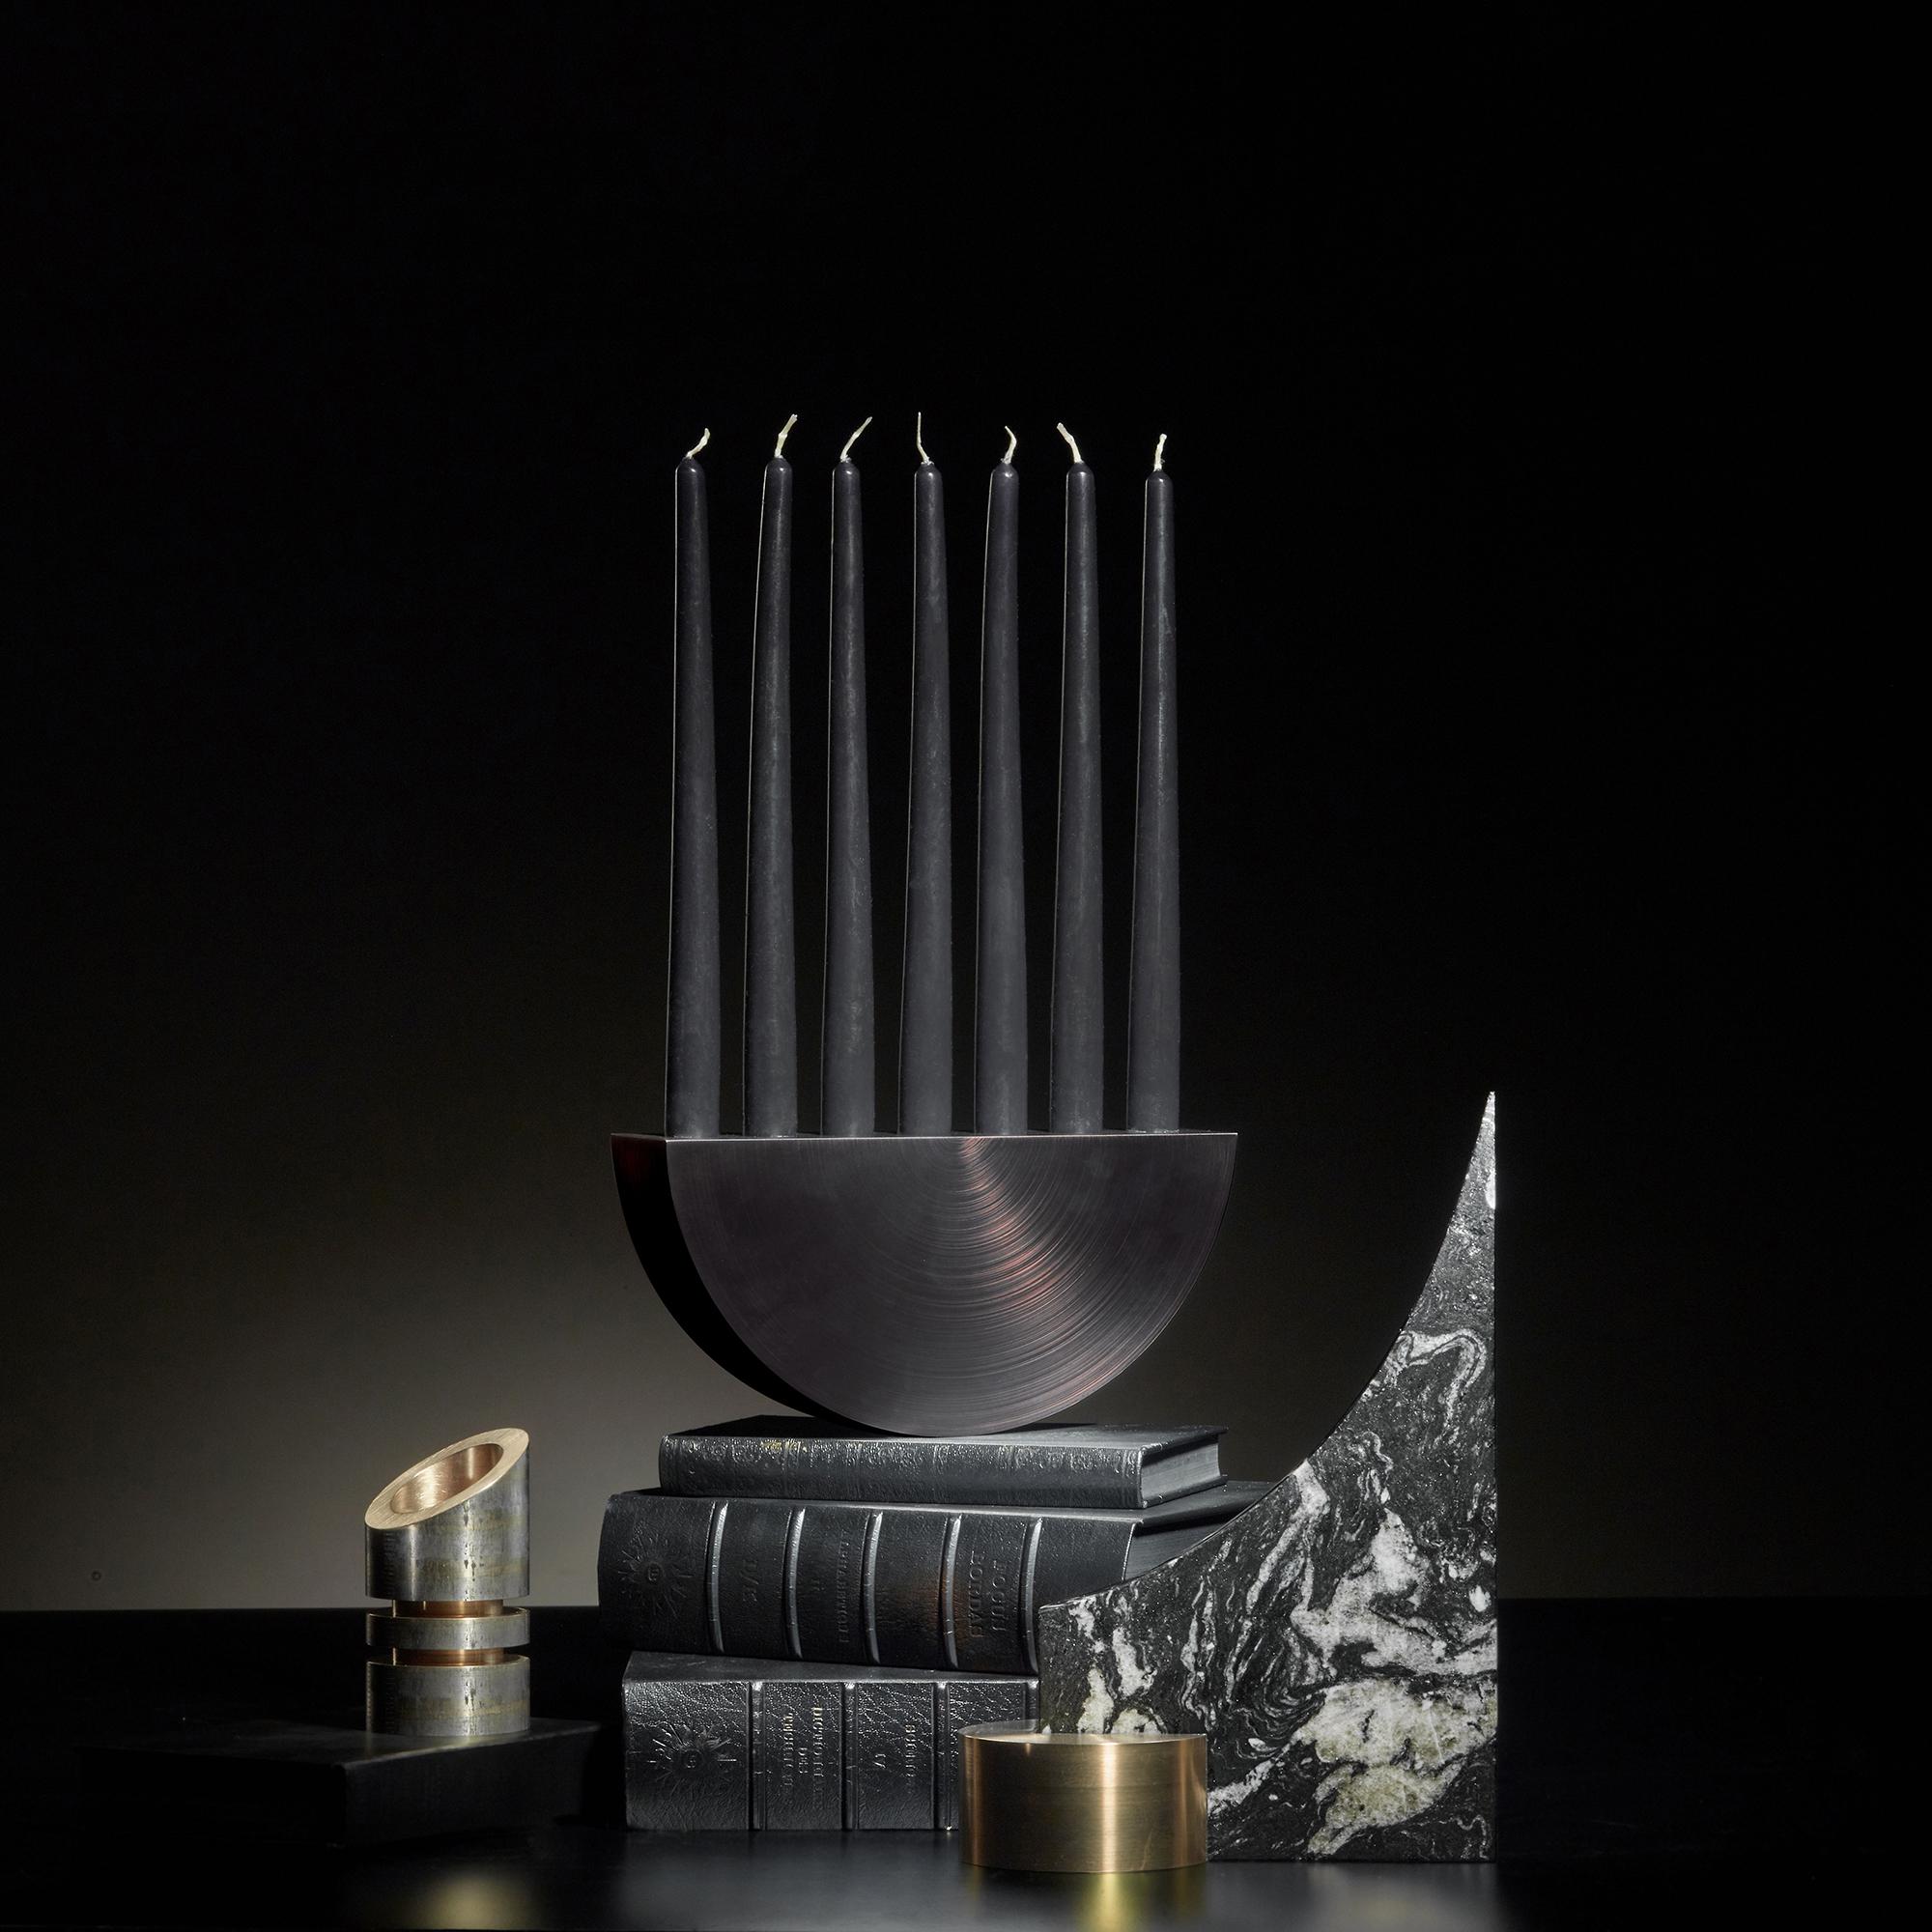 Modern Play with Fire Limited Edition Candelabrum in Nickel Smoked Copper Aluminium